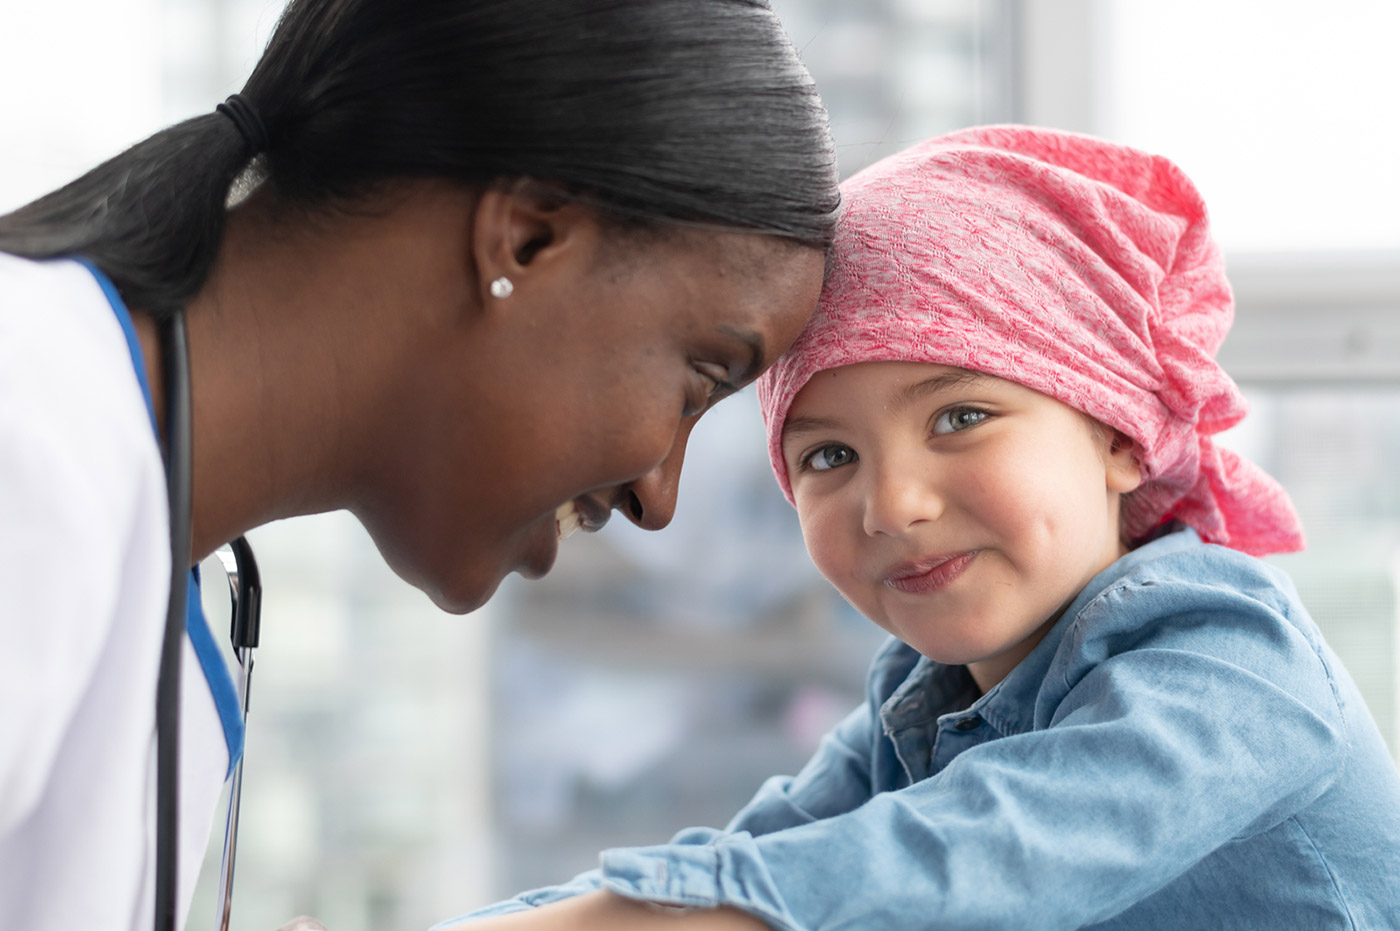 A female doctor with a young patient wearing a headscarf.